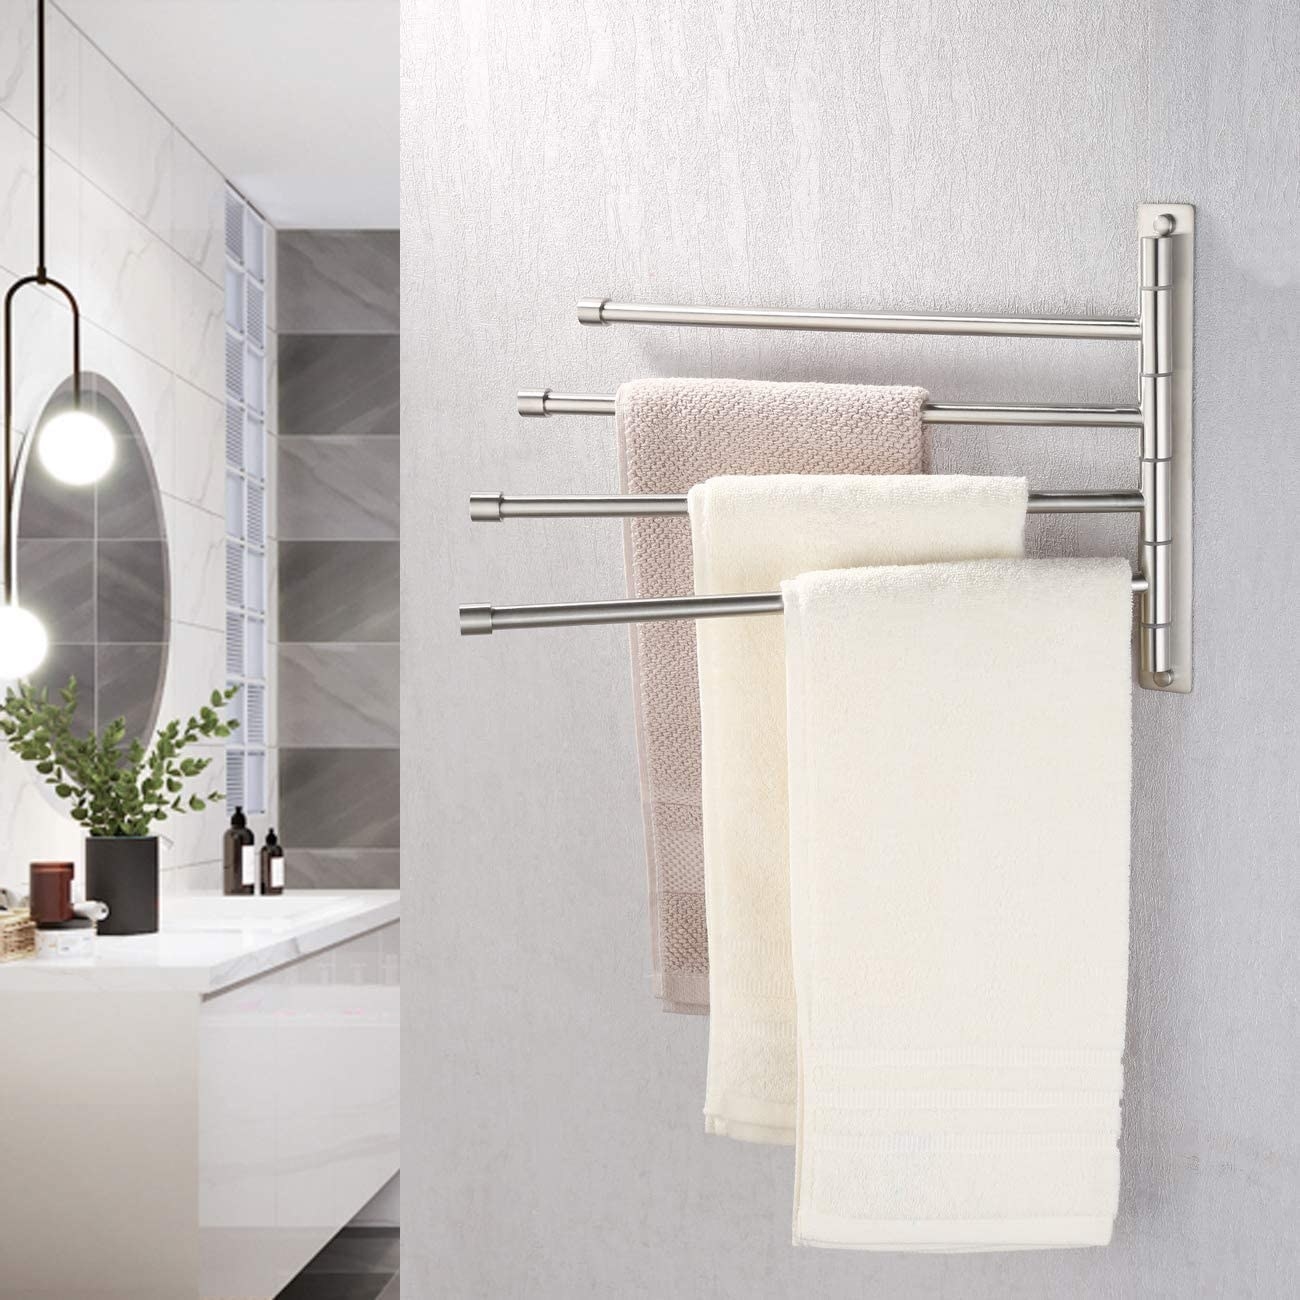 rack with four different swivel arms for a place to hang four towels